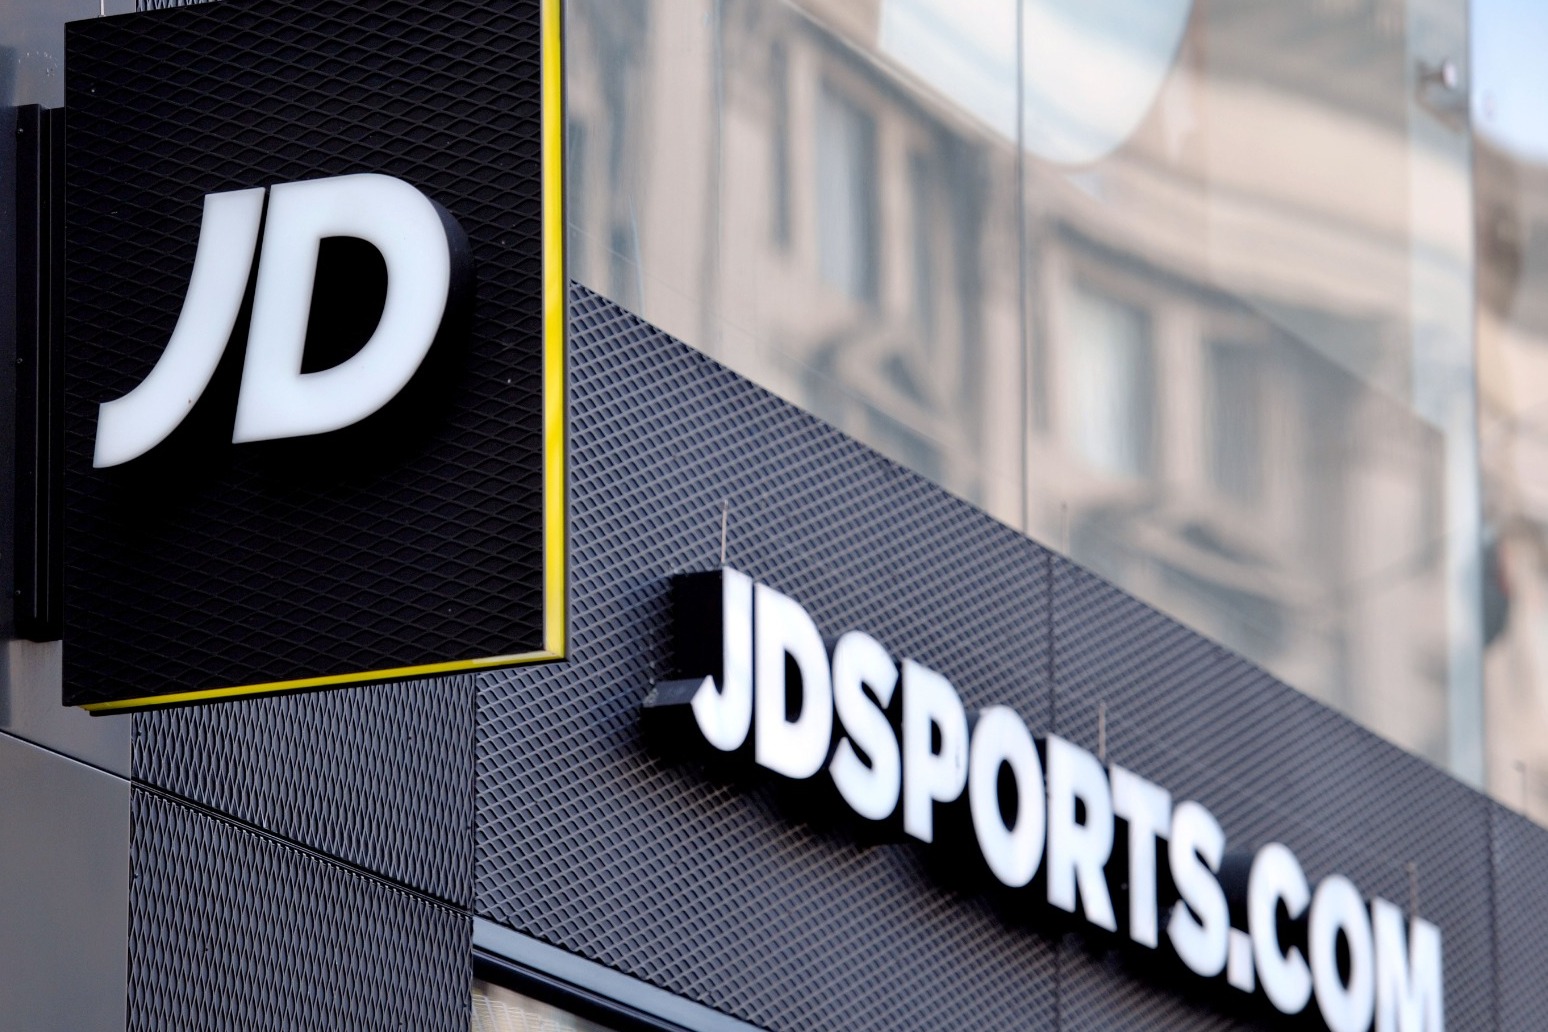 JD Sports Elite Sports and Rangers Football Club fixed kit prices says CMA